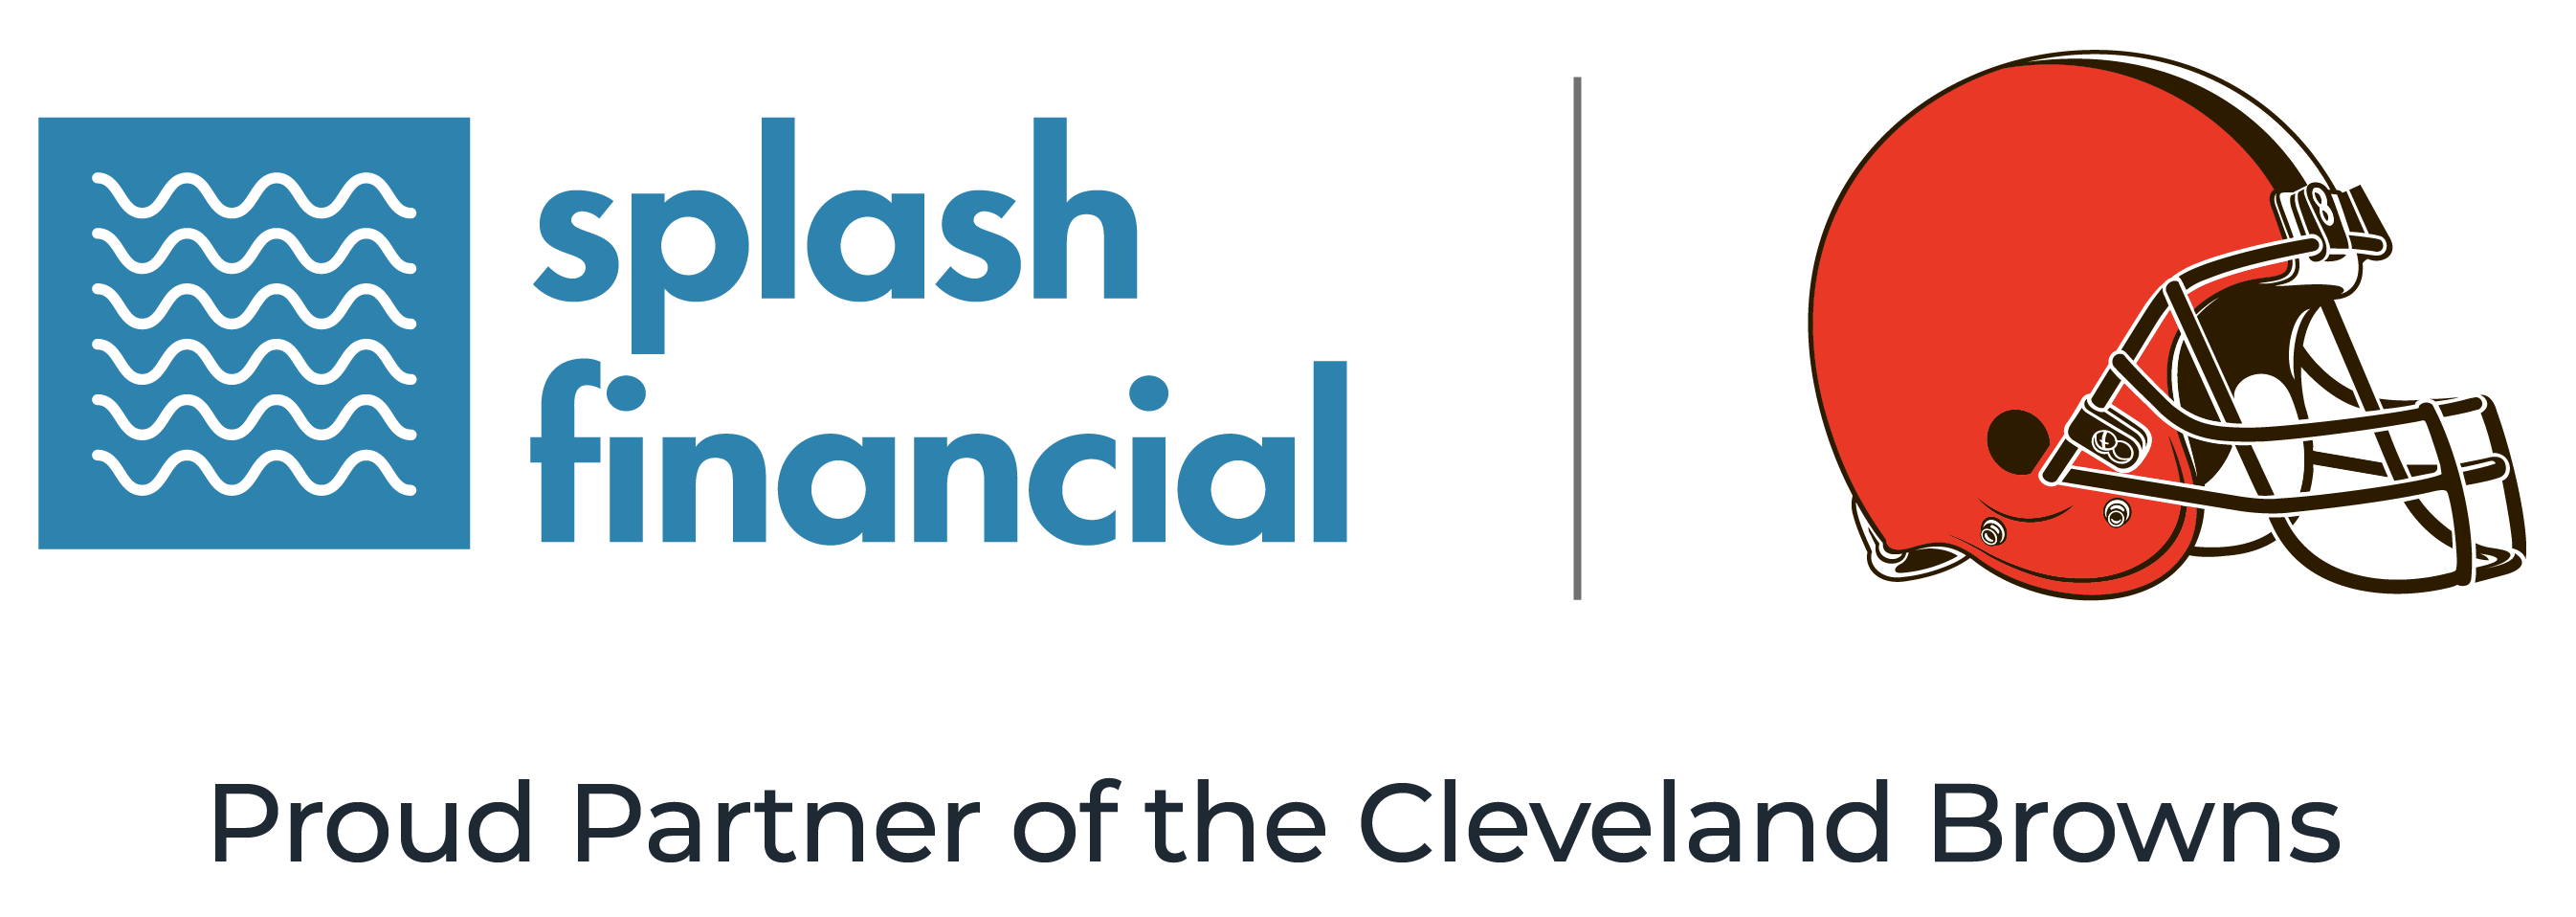 Splash Financial is now proud student loan refinancing partner of the Cleveland Browns.